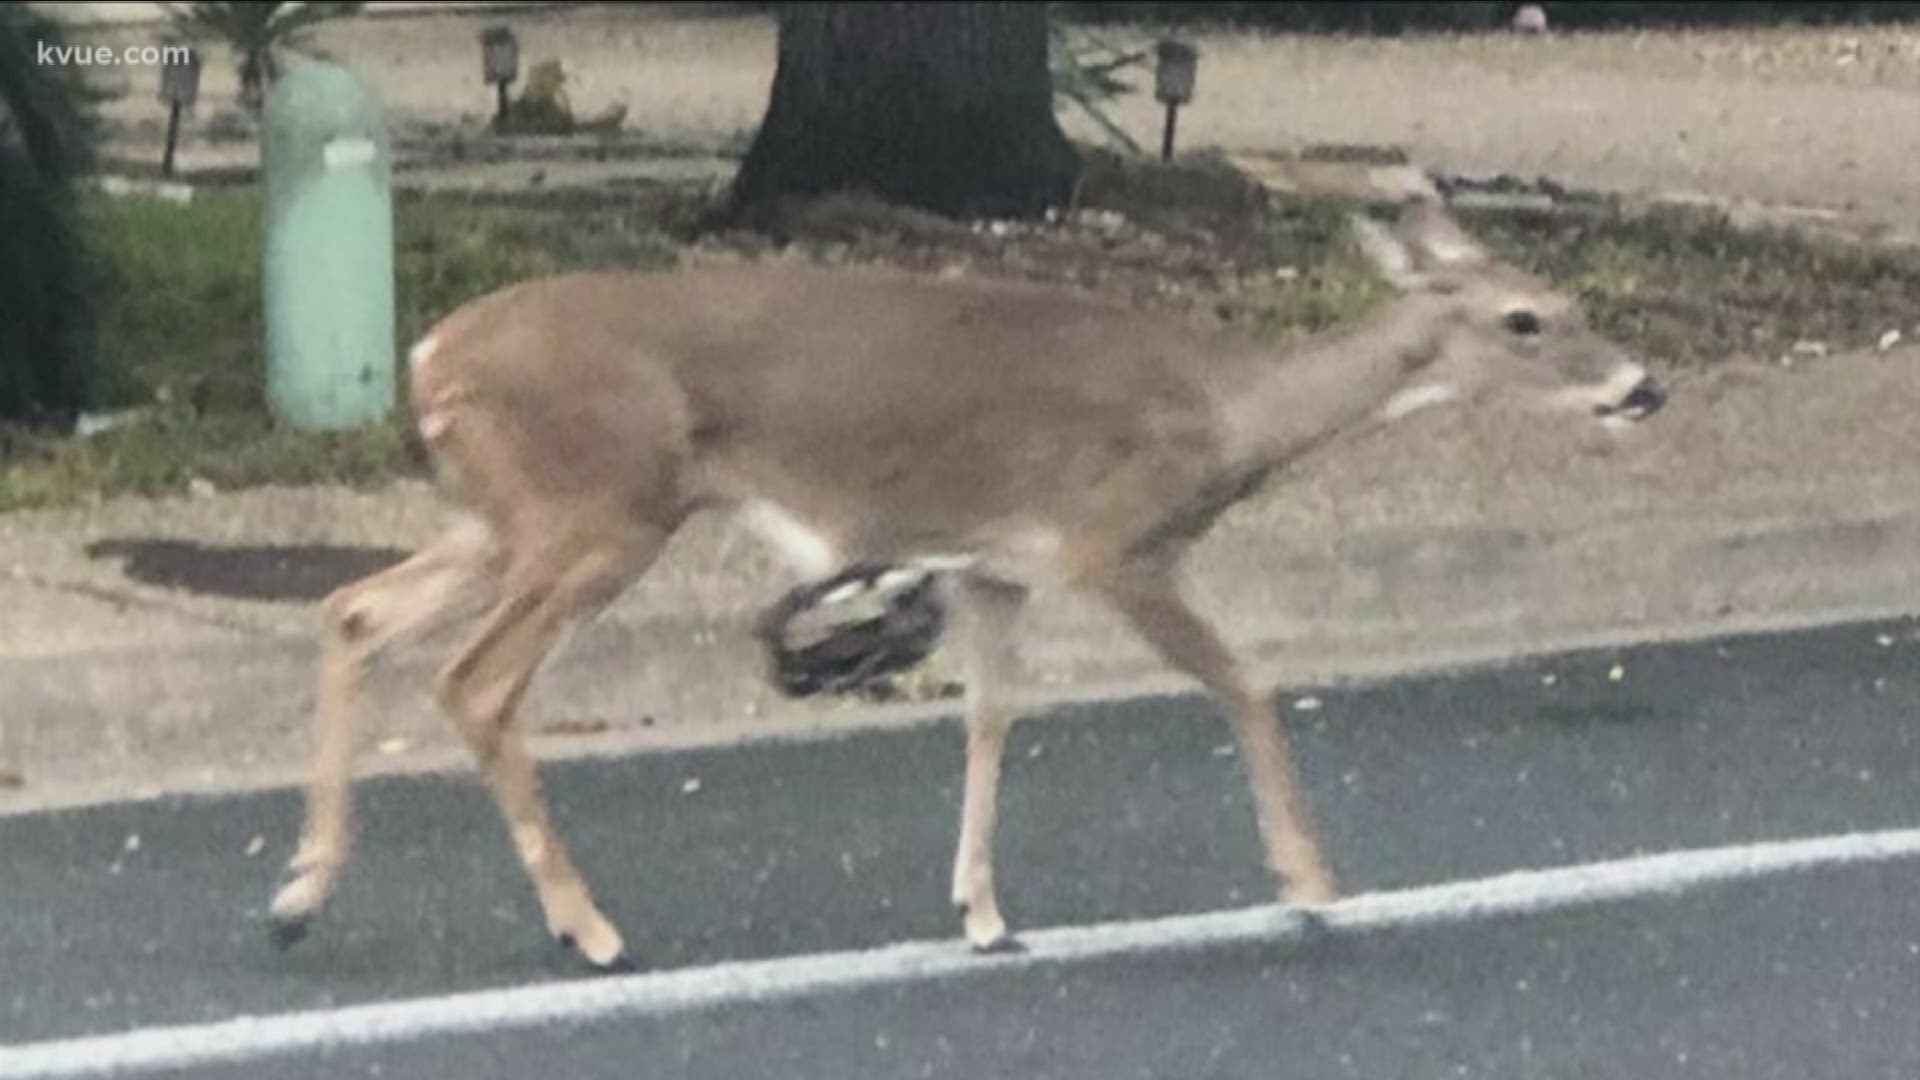 Injured deer have been spotted in the Great Hills neighborhood twice in the past two weeks.